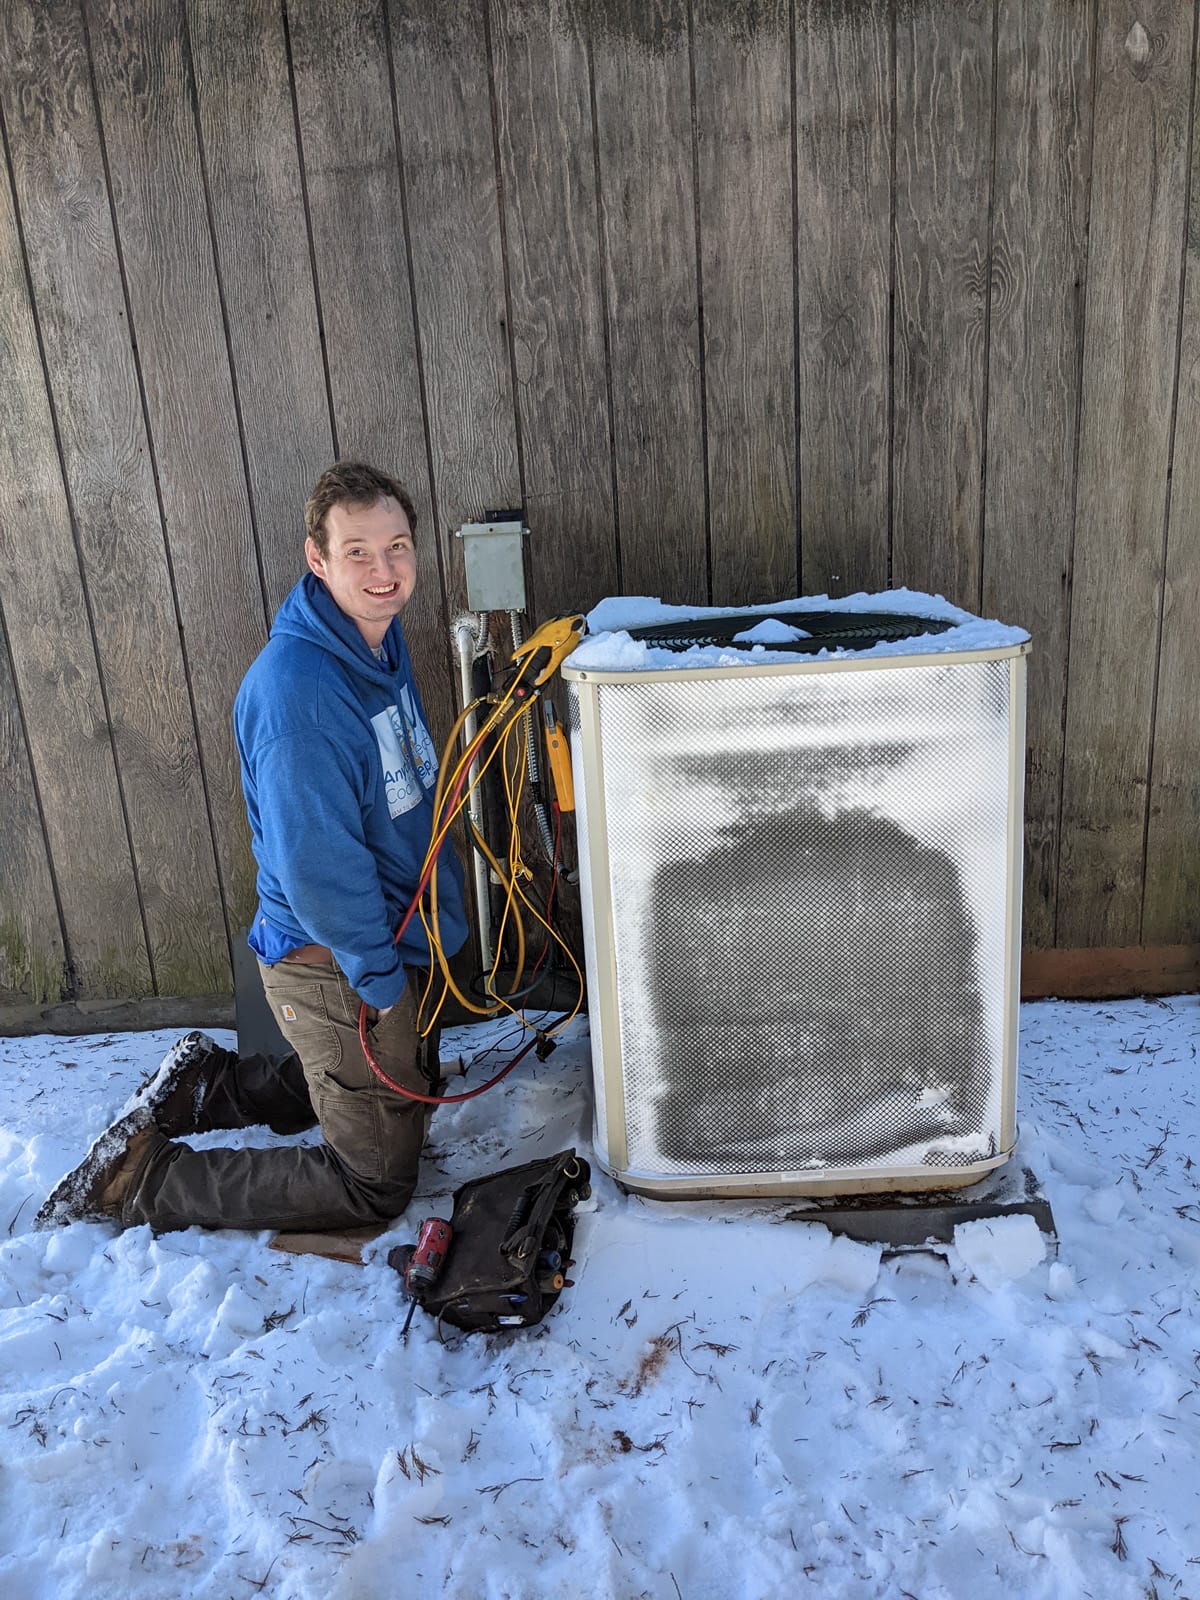 Technician employing HVAC leak detection methods while servicing an outdoor air conditioning unit in winter conditions.